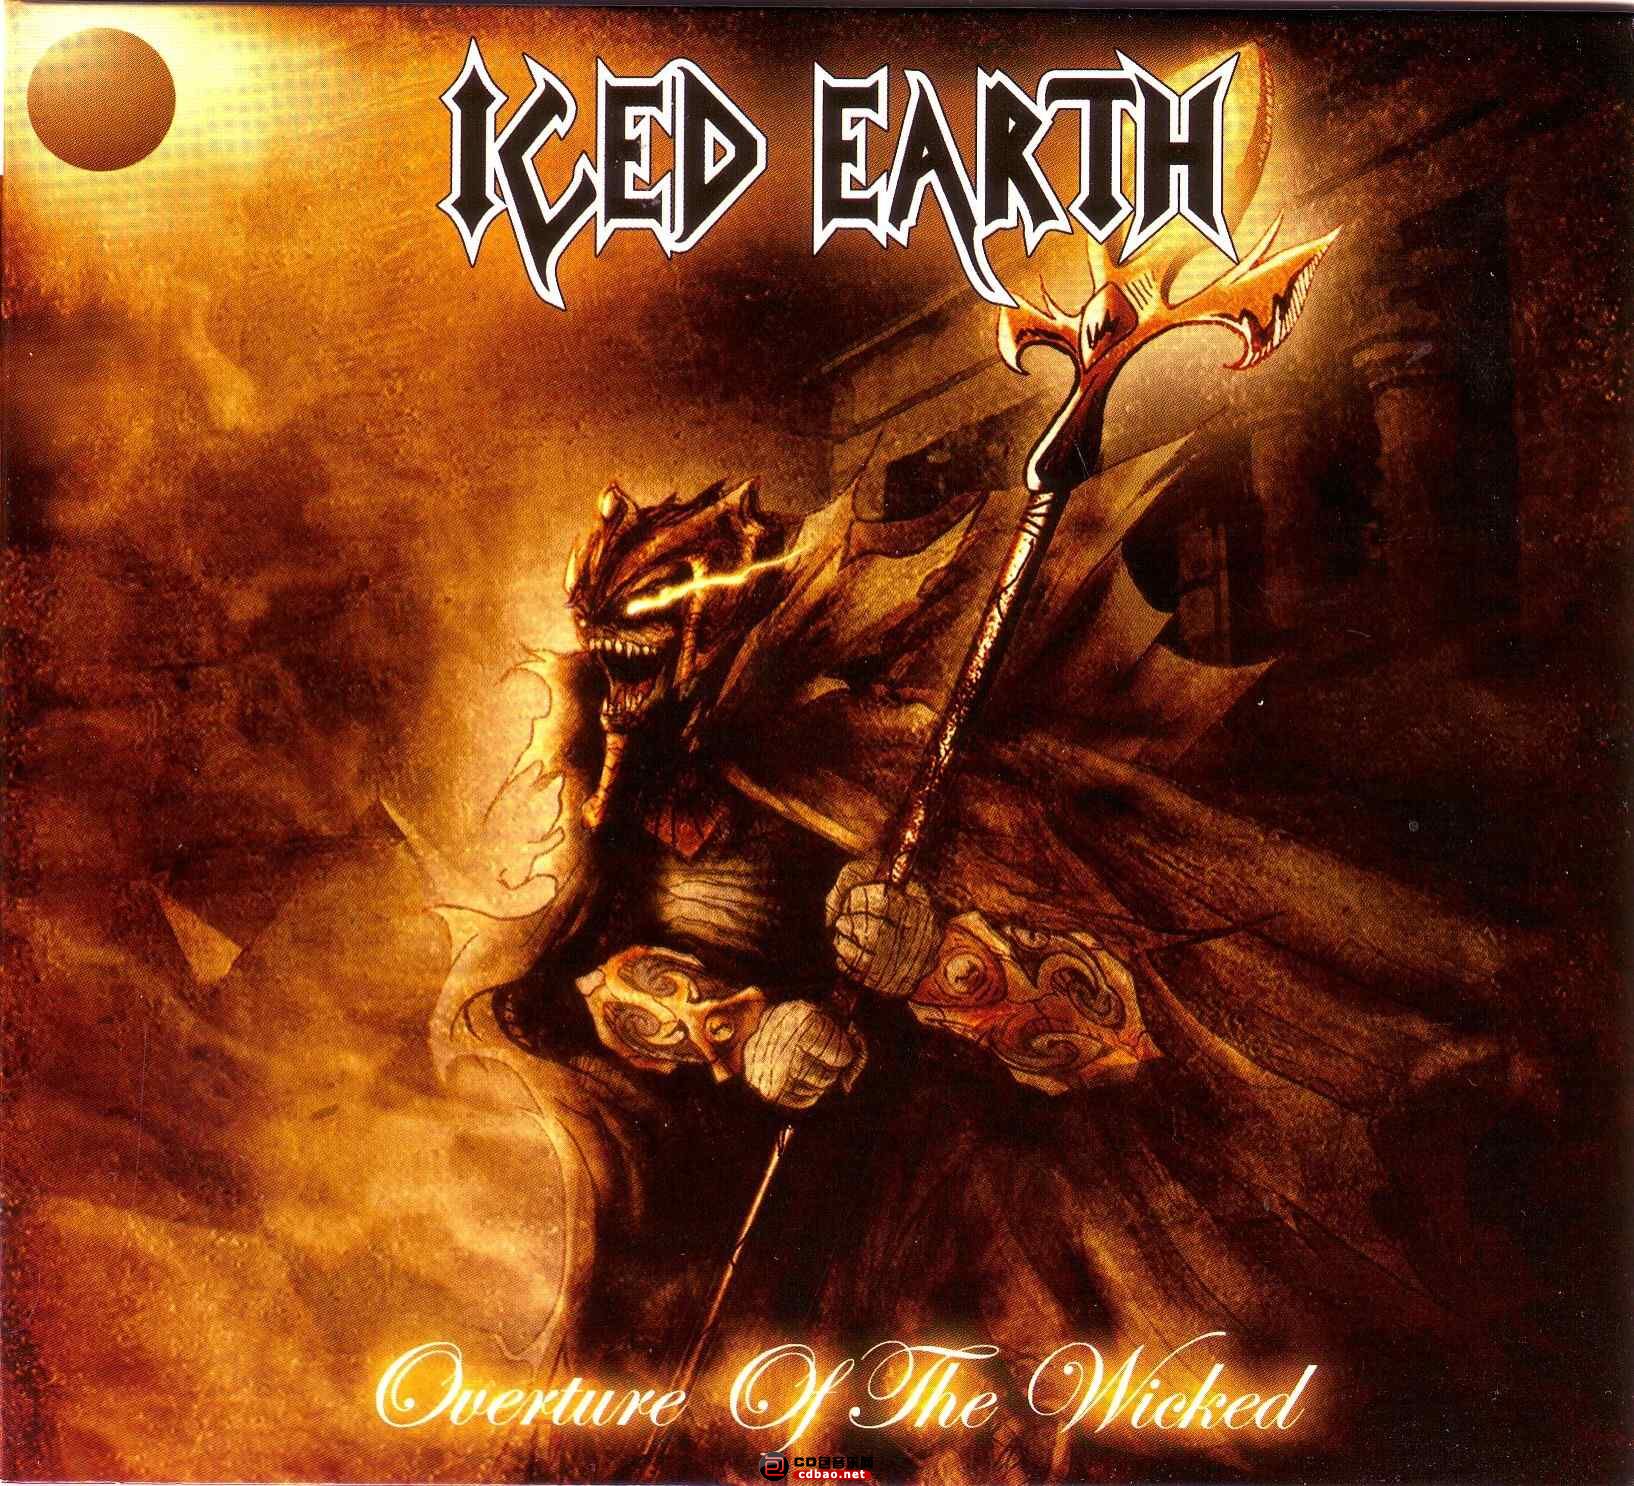 Iced Earth - Overture Of The Wicked - Front_2.jpg